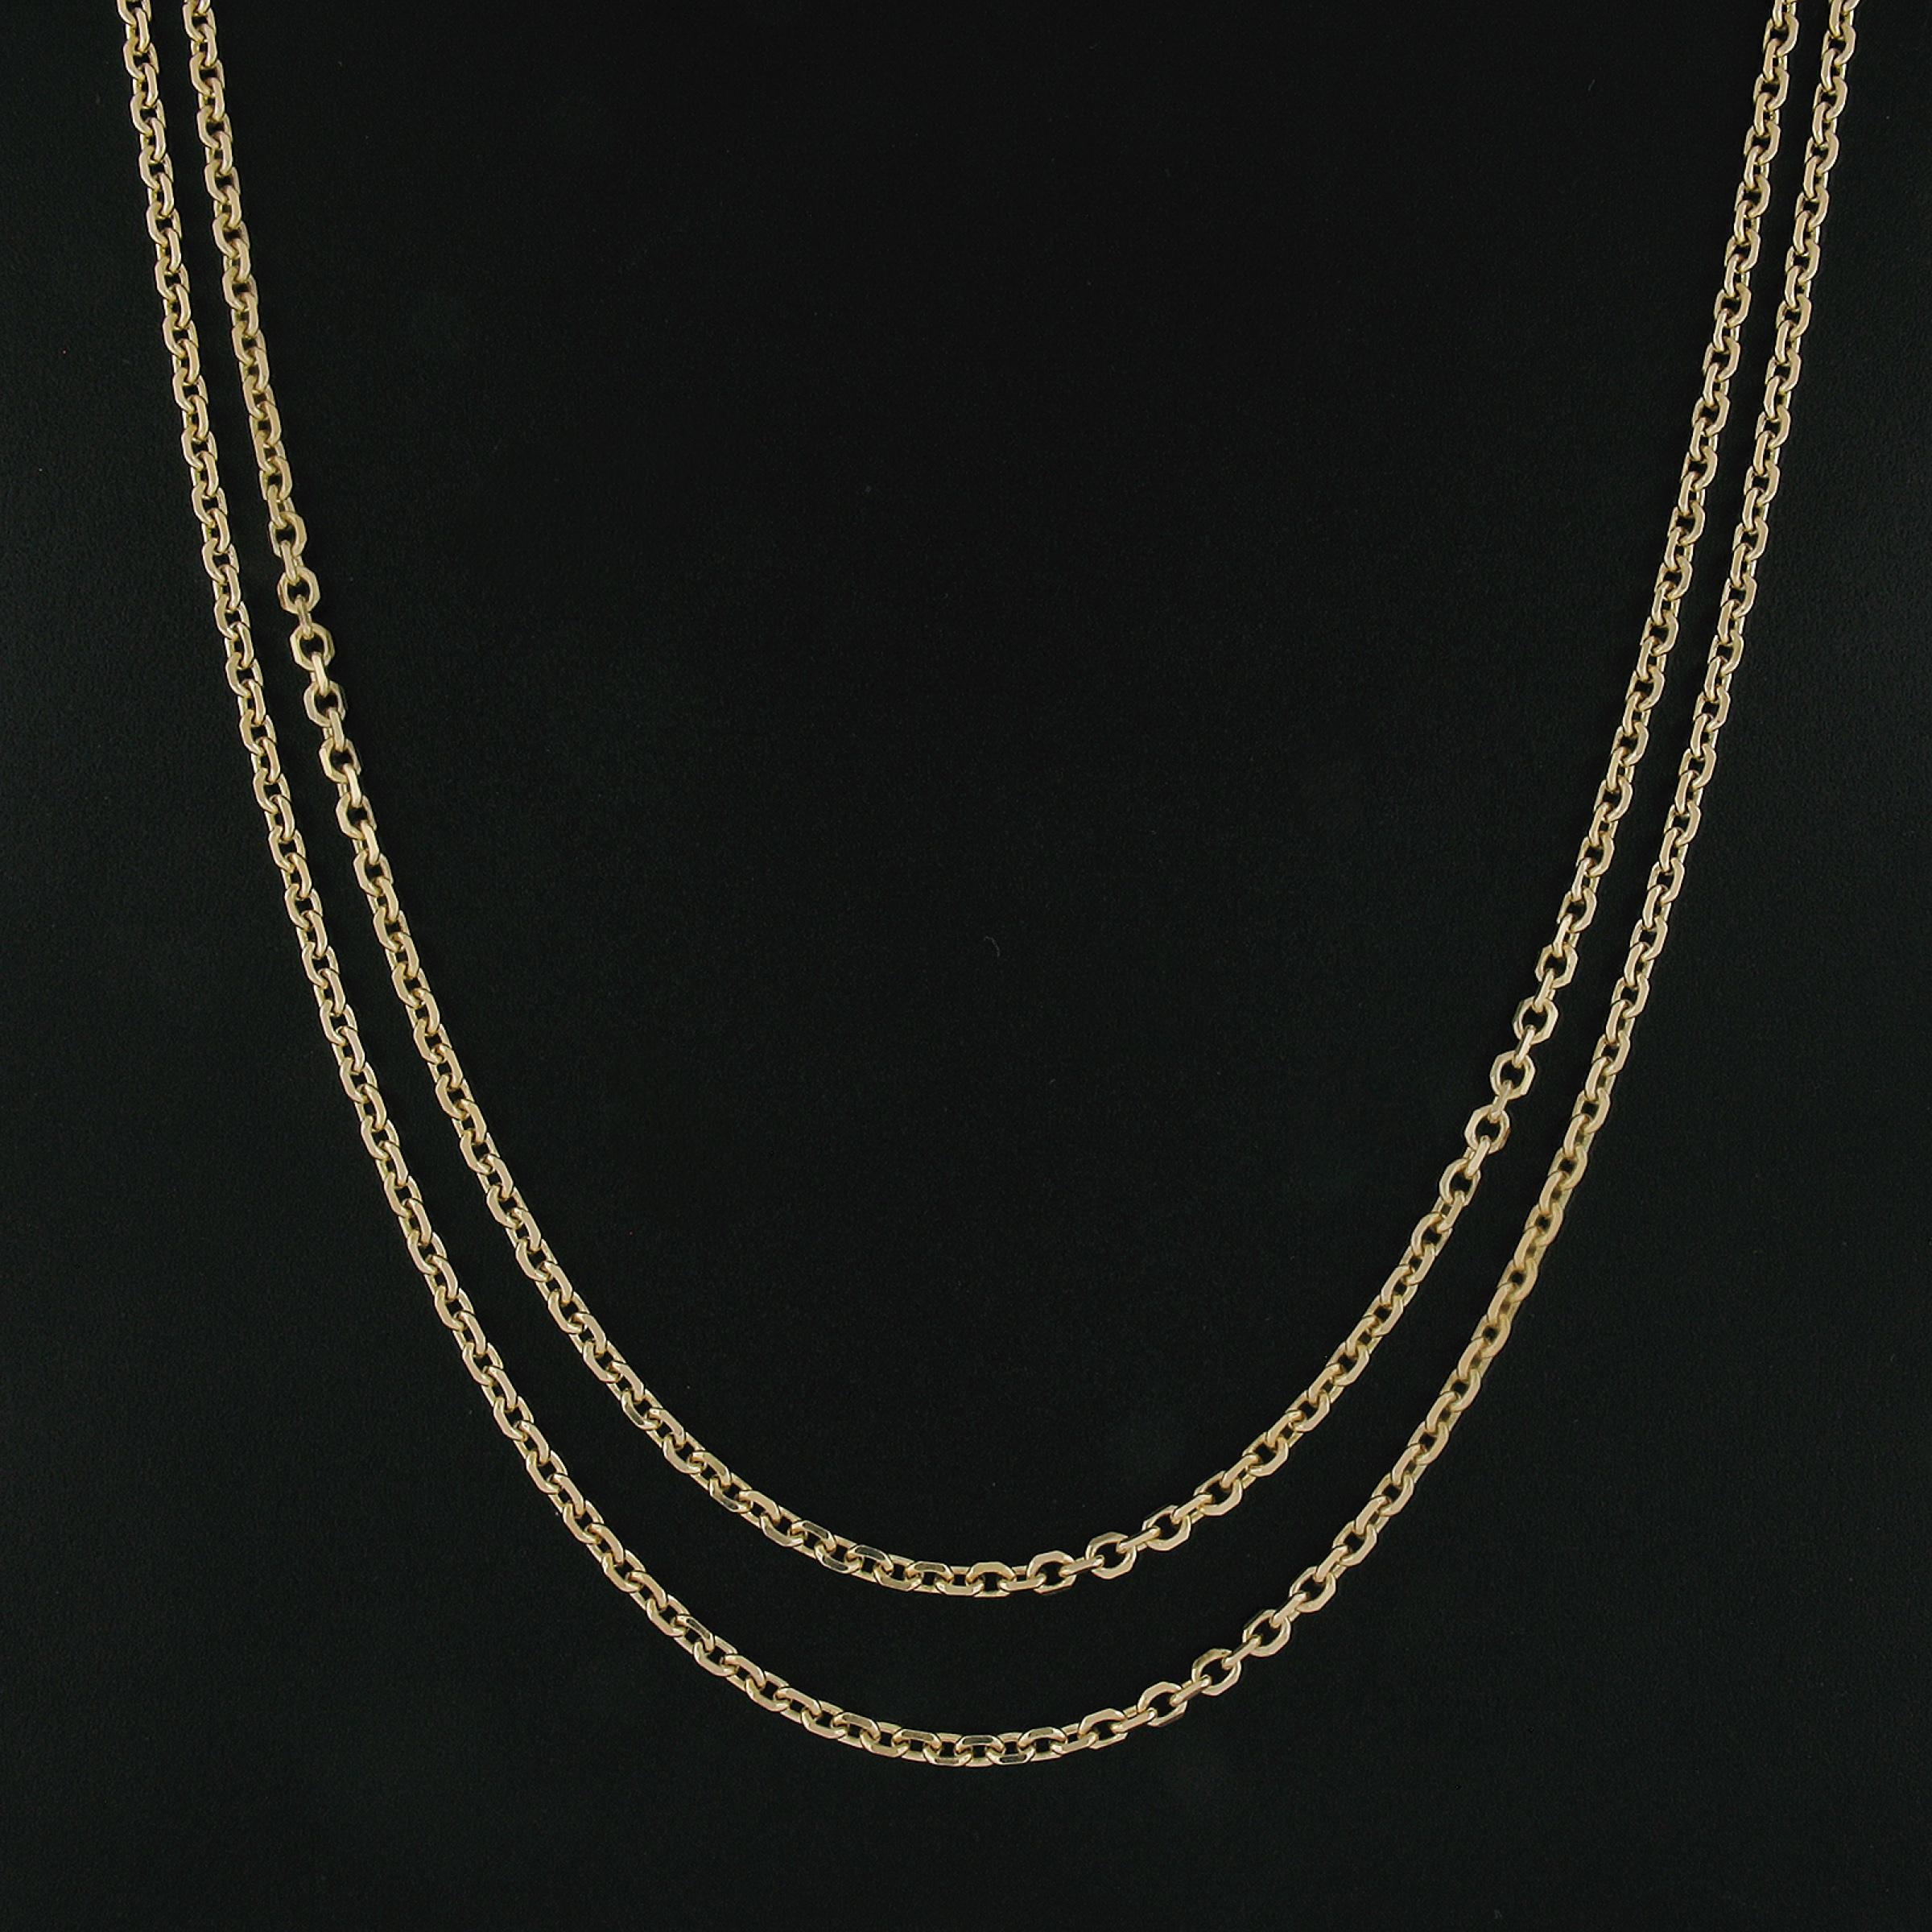 Solid 14K Yellow Gold Long 36